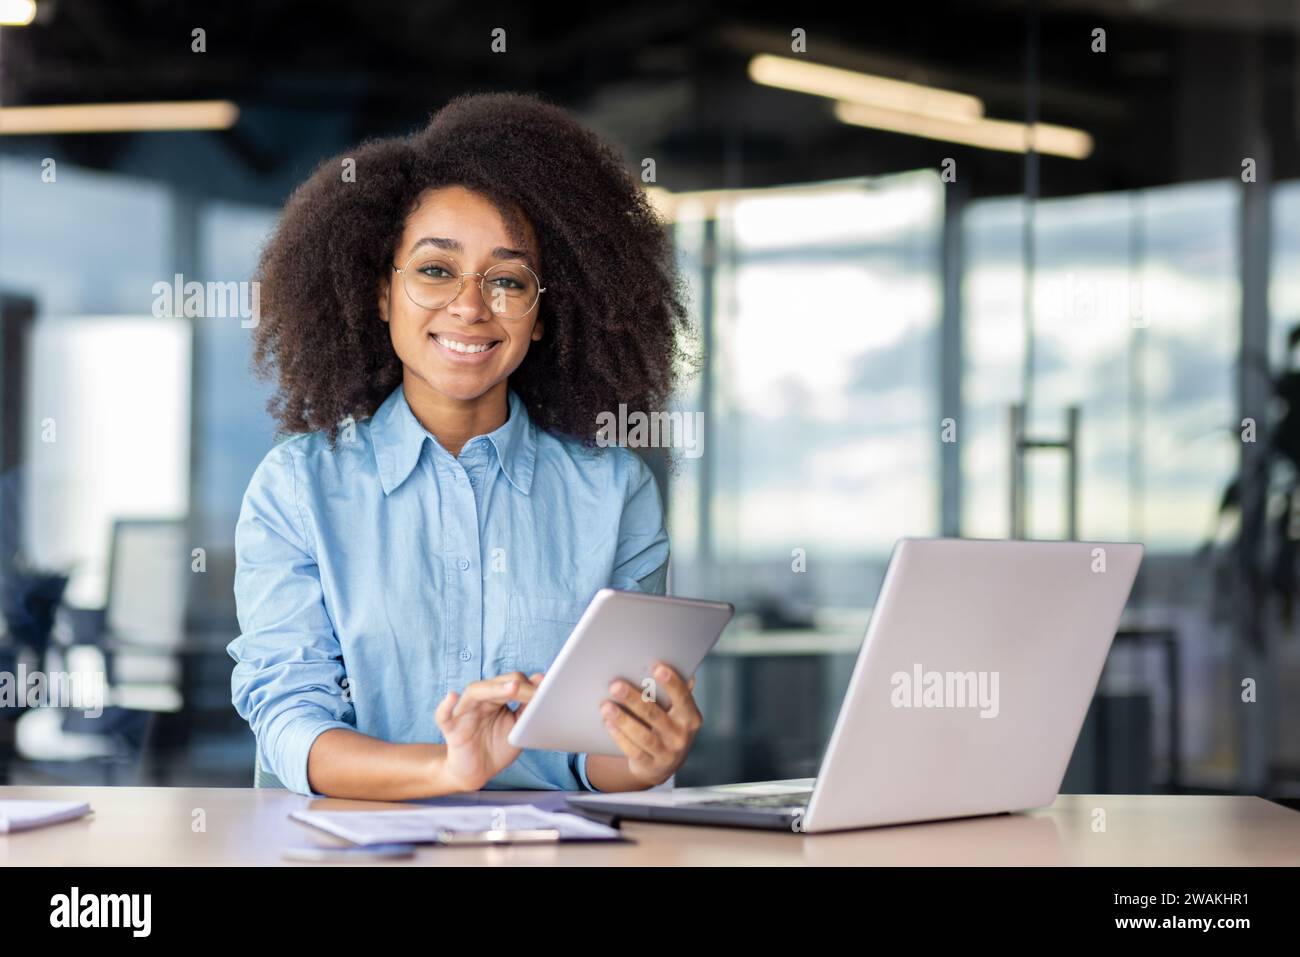 Portrait of a smiling young African American woman sitting at a desk in the office, holding a tablet and smiling at the camera. Stock Photo